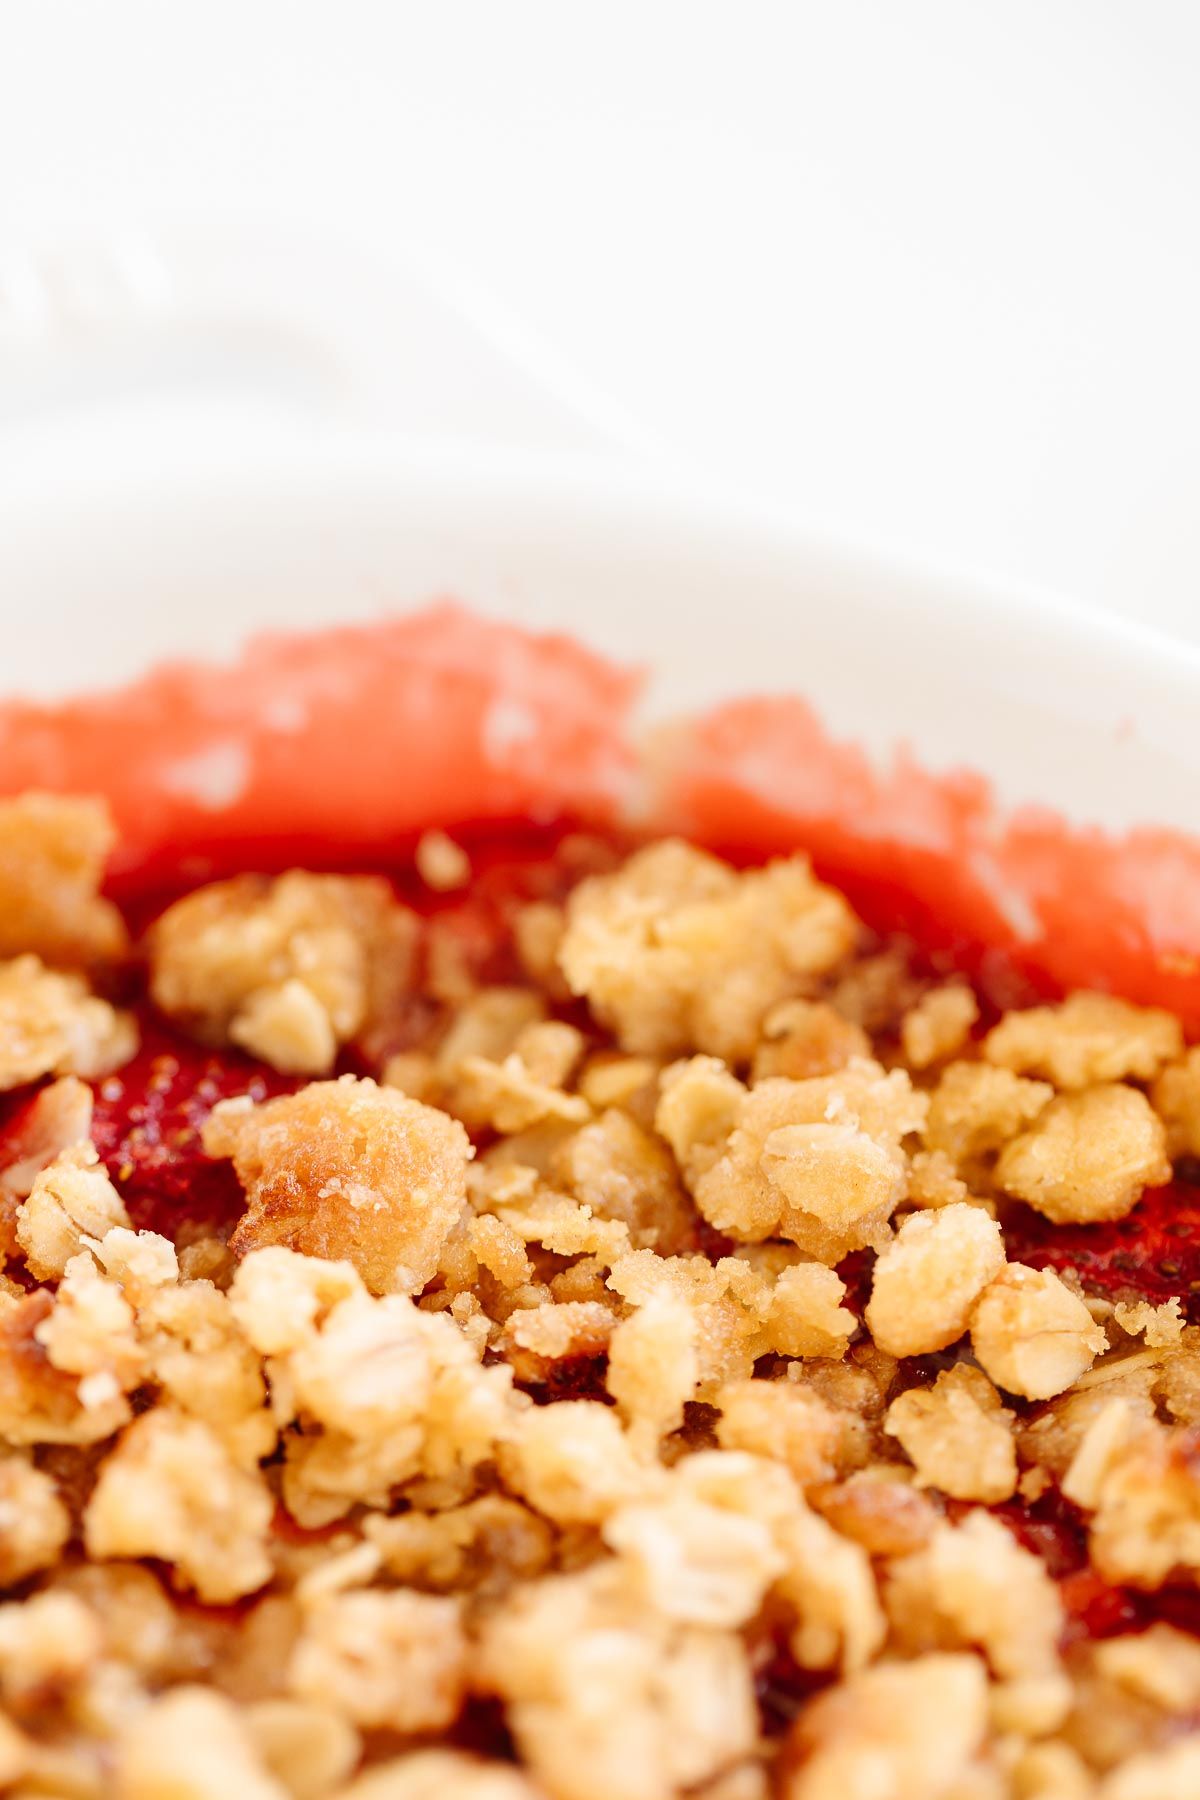 A strawberry crumble, topping with a crumble topping with oats.